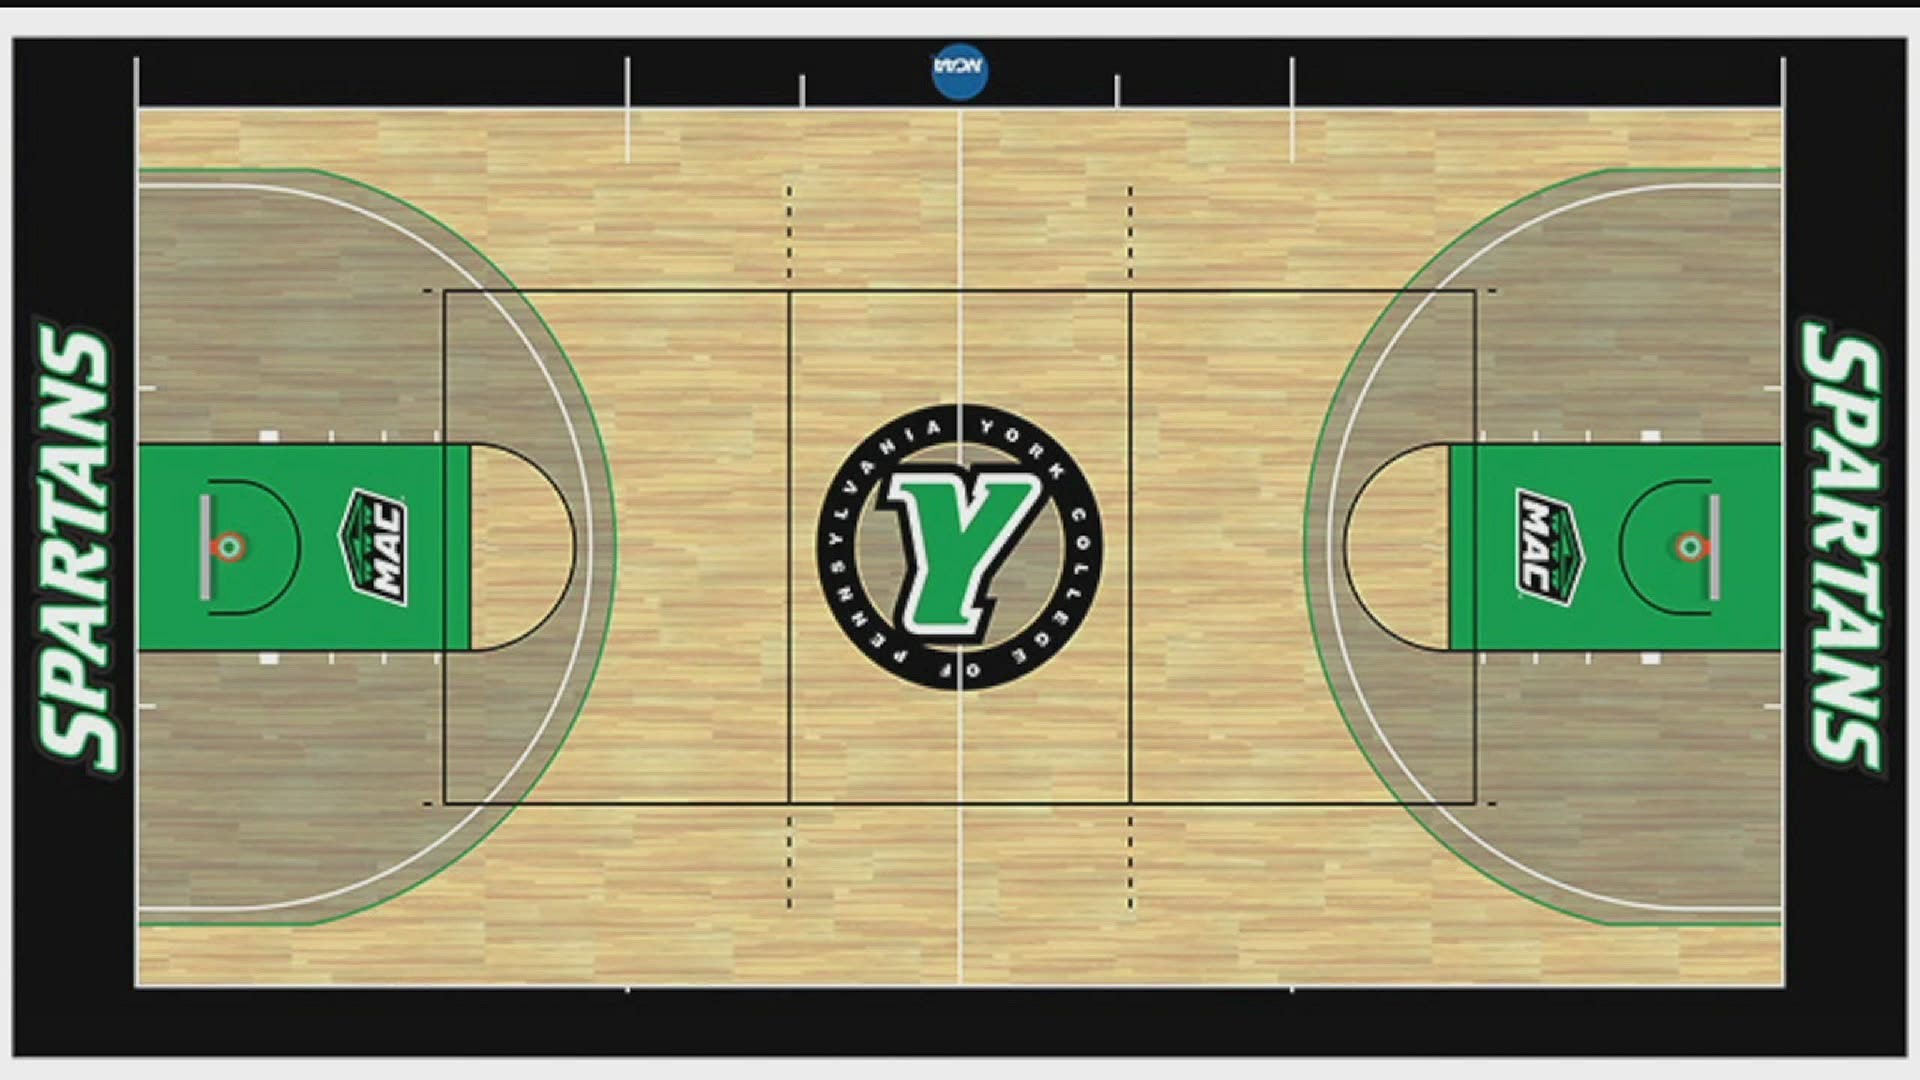 Wolf Gym will have a new look when the Spartans return next season.